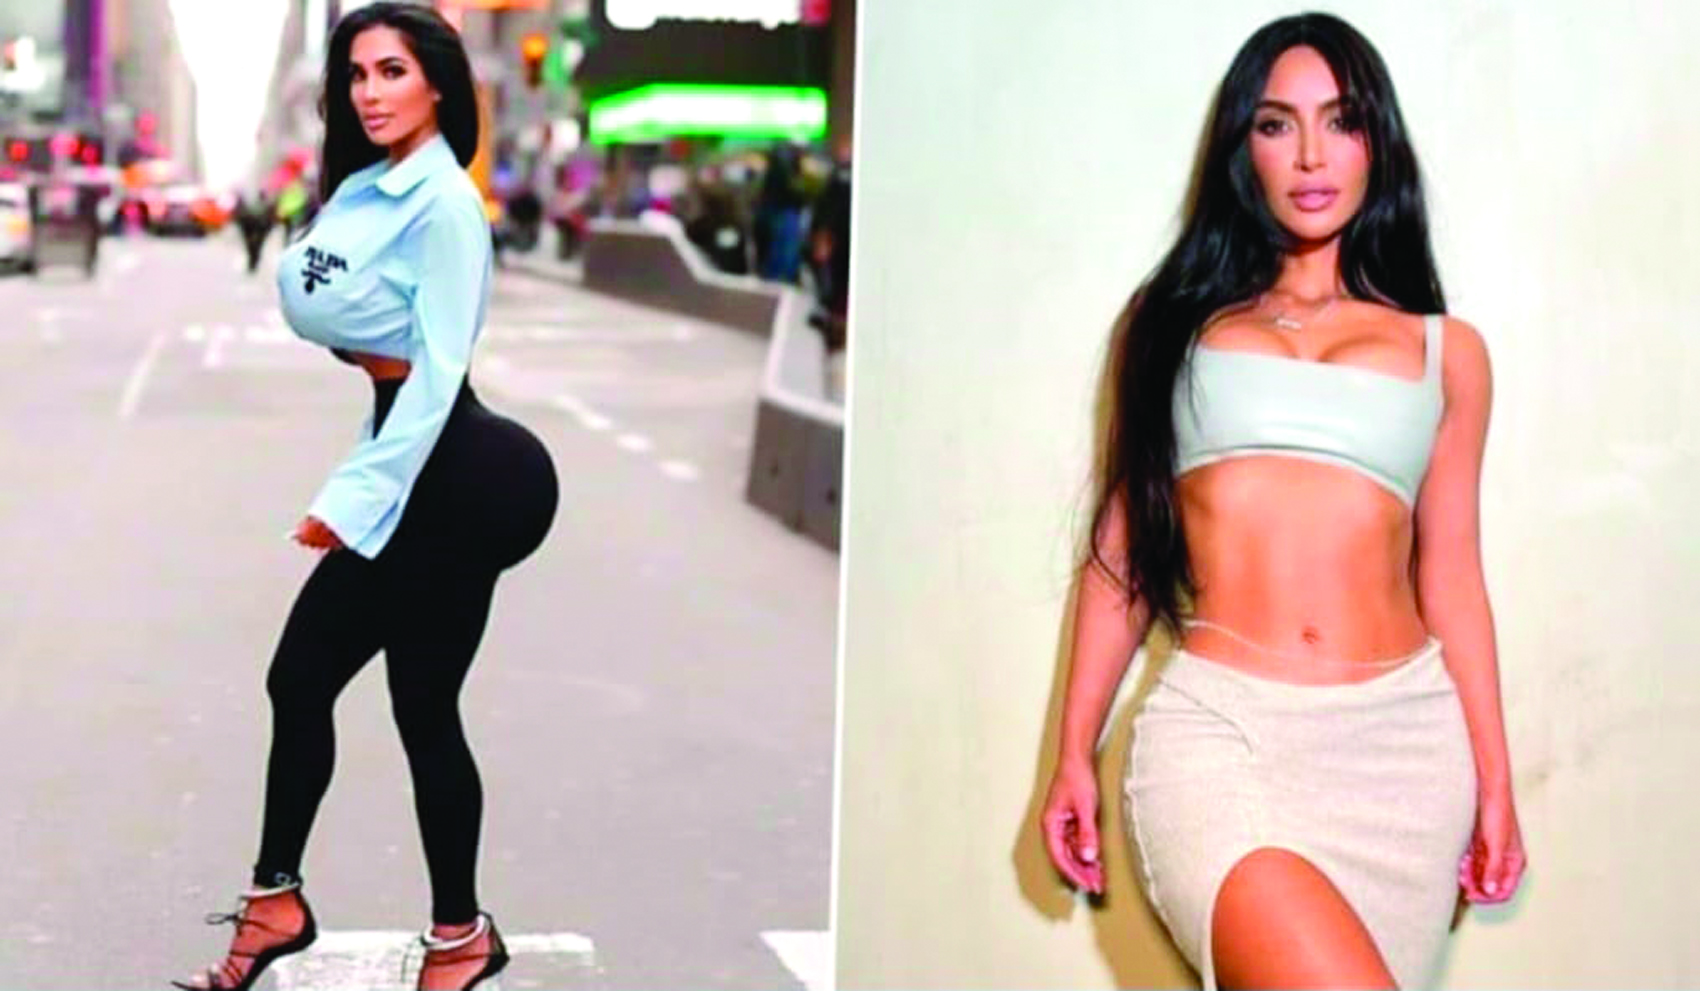 Christina Ashten Gourkani or Ashten G, popular on social networks for her resemblance to Kim Kardashian, died in surgery to look like the celebrity.